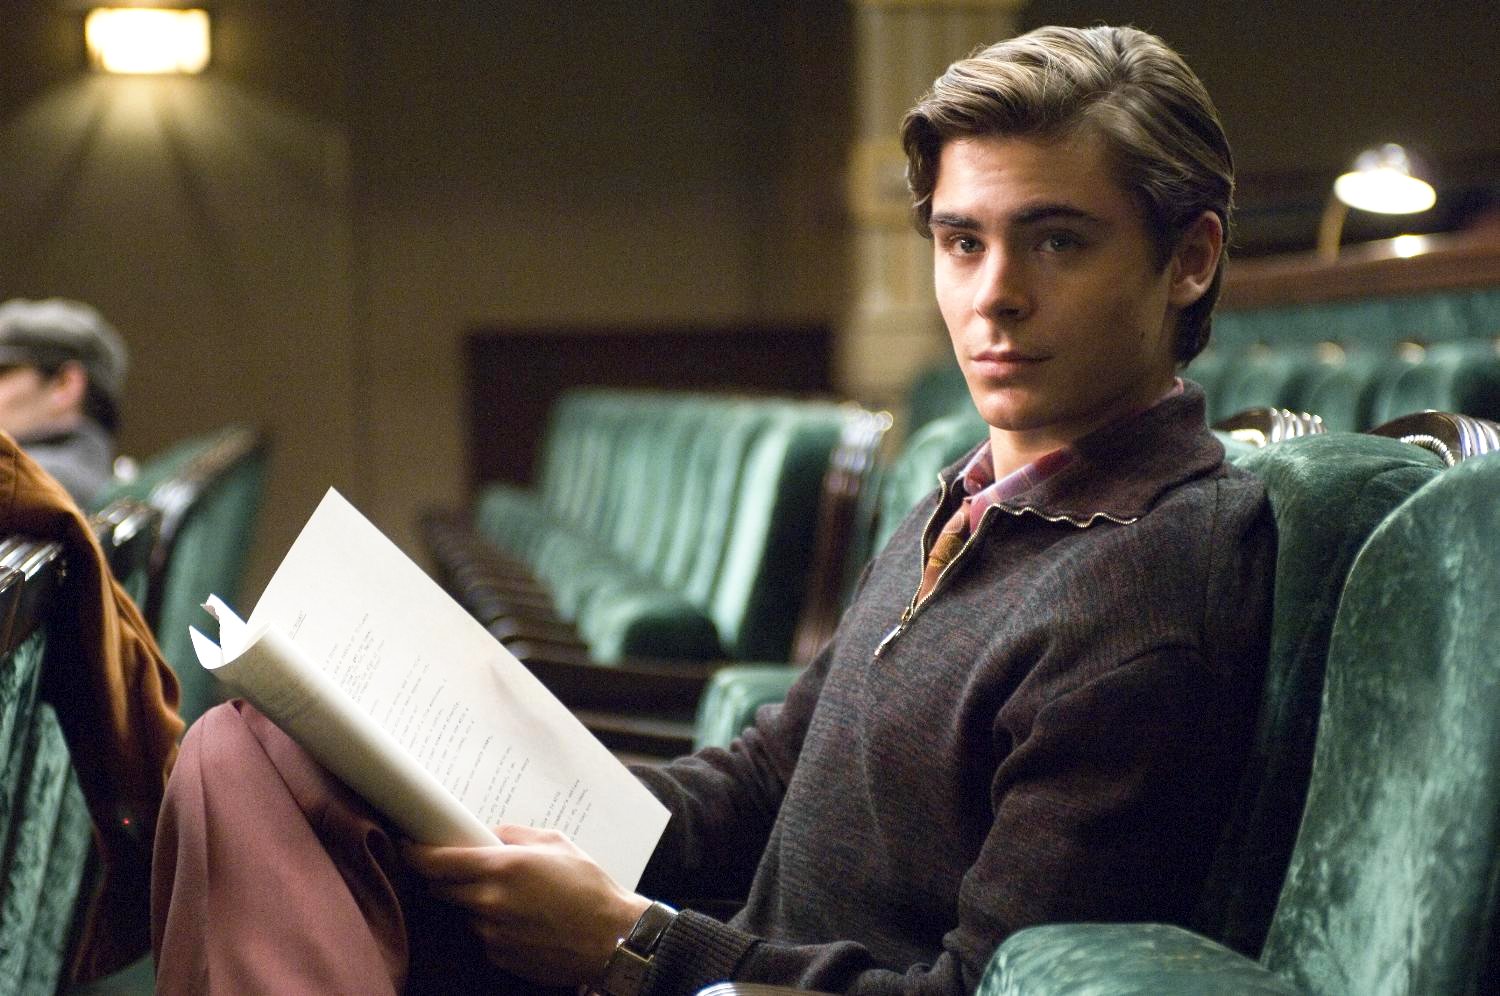 Zac Efron stars as Richard Samuels in Freestyle Releasing's Me and Orson Welles (2009). Photo credit by Liam Daniel.